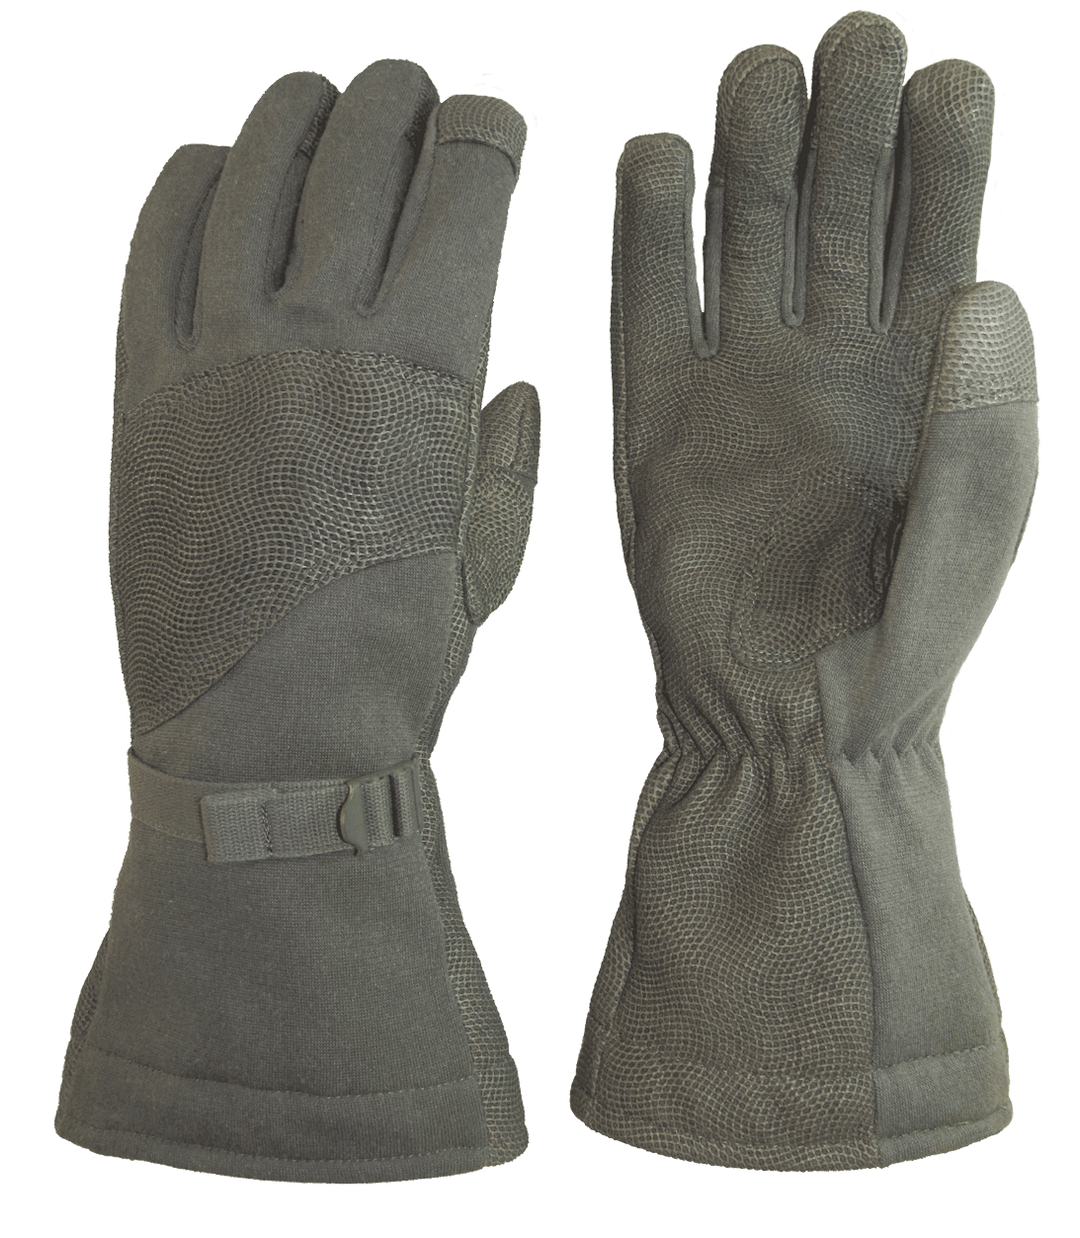 Apparel - Hands - Gloves - USGI Army Cold Weather Foliage Green Flyer's Gloves (SURPLUS)